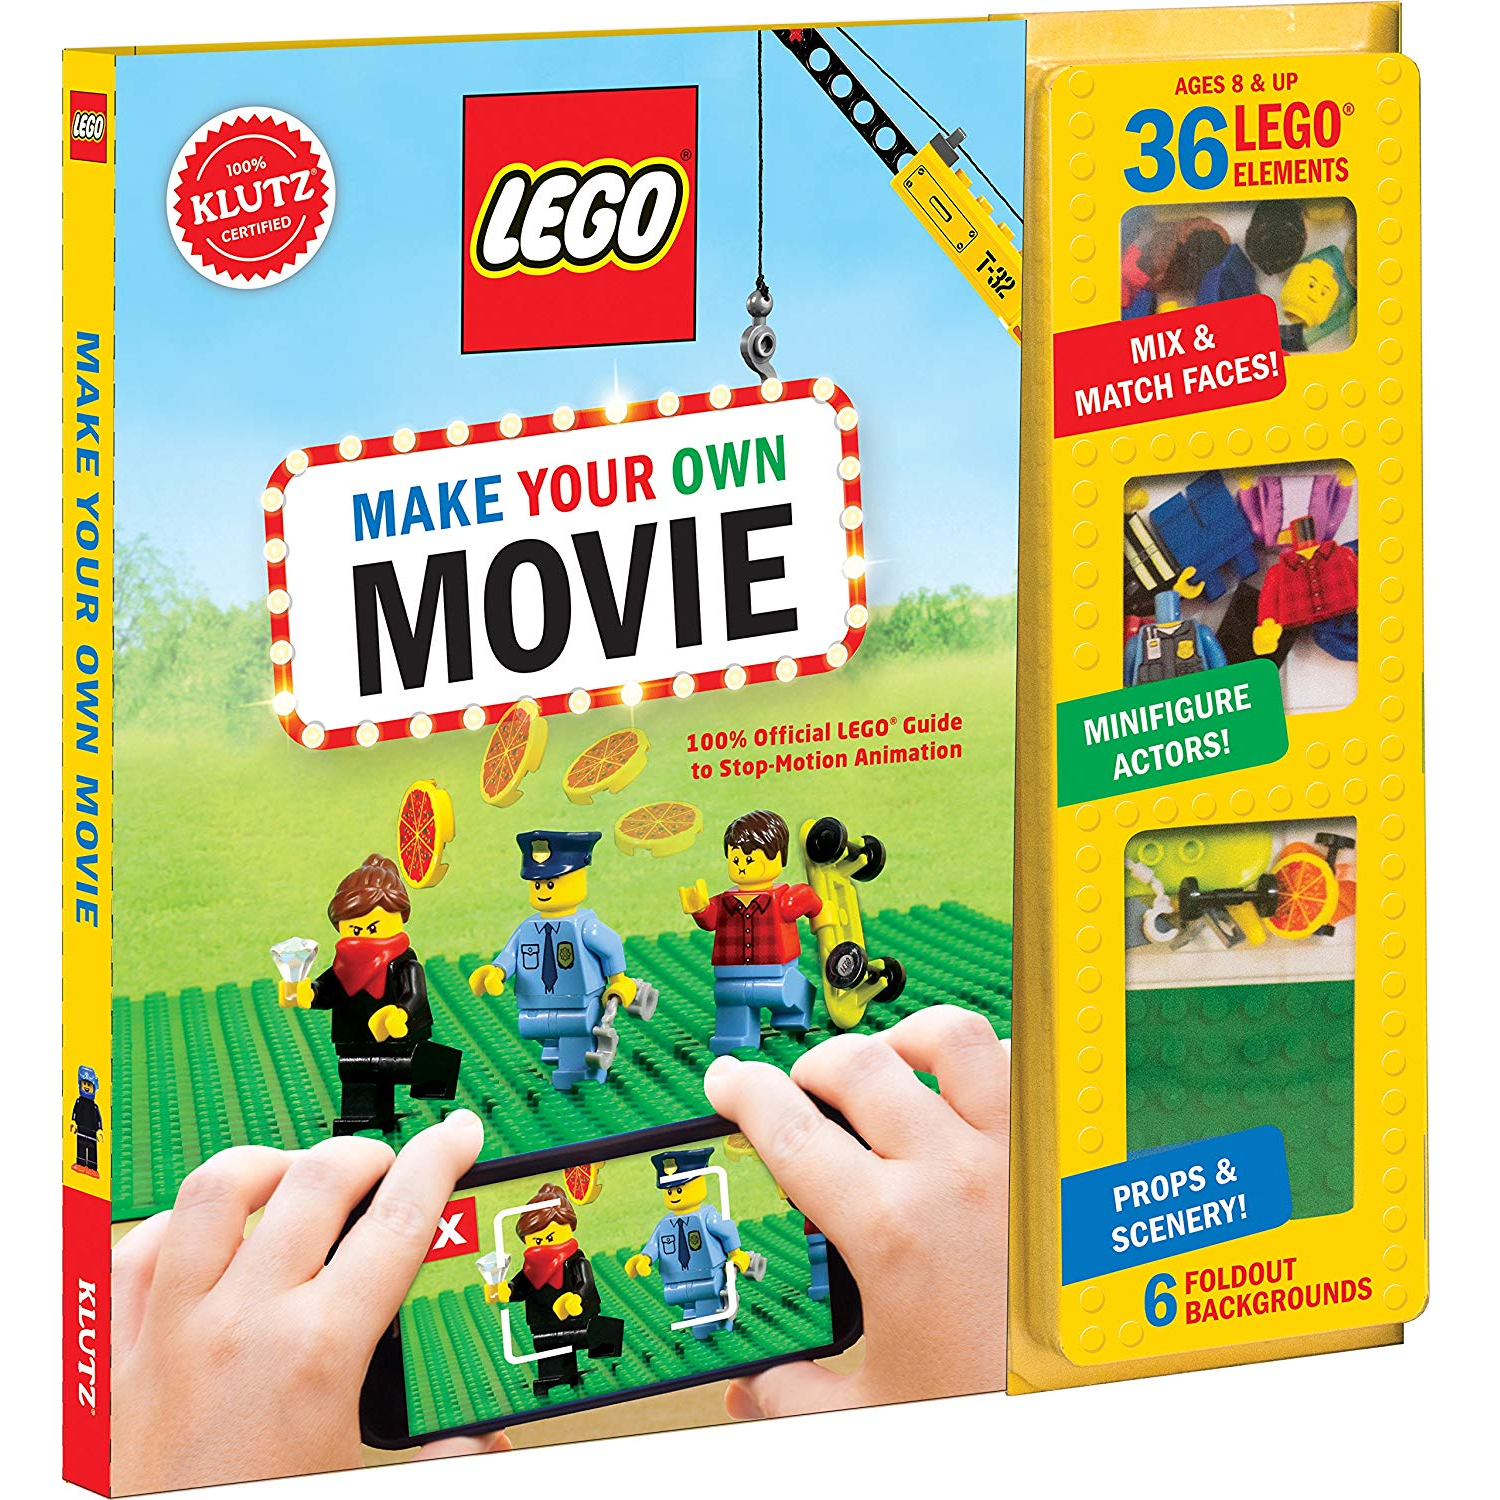 Klutz Lego Make Your Own Movie Activity Kit Only $15.16!